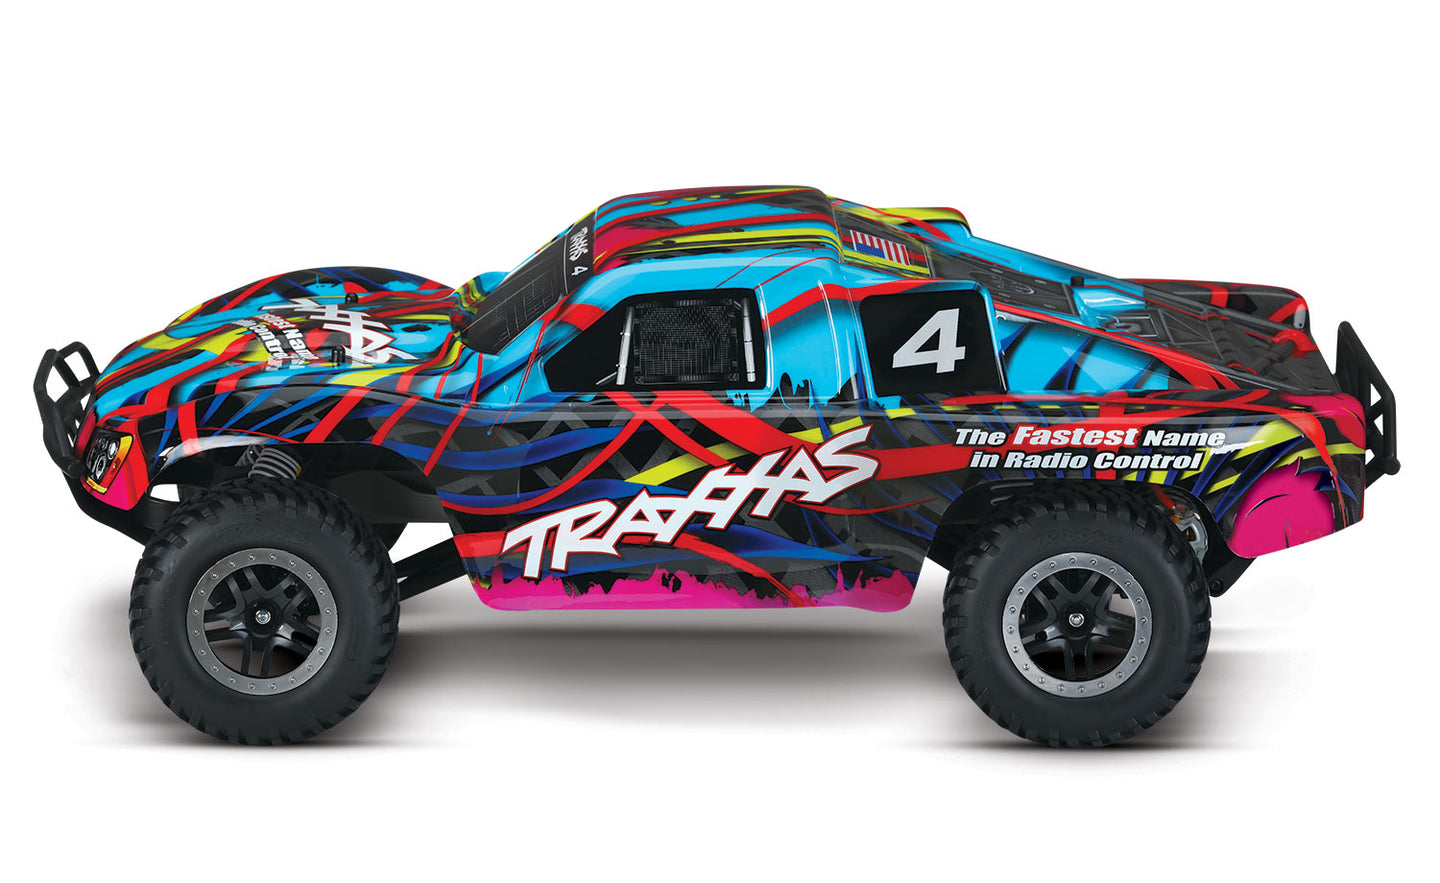 58034-1 - Slash: 1/10-Scale 2WD Short Course Racing Truck (READY TO RUN)